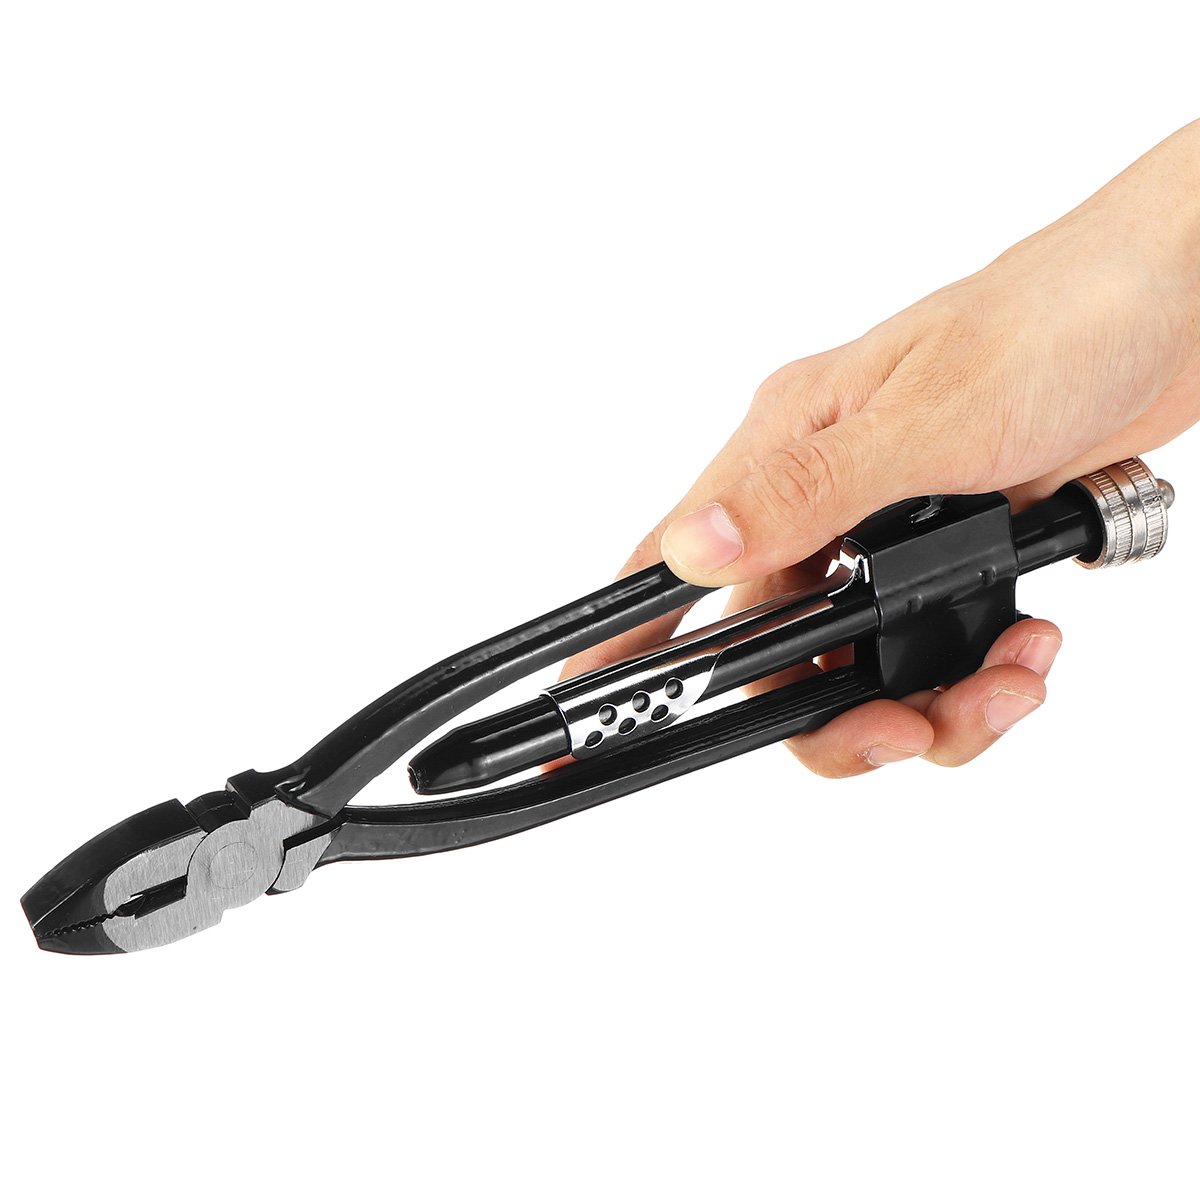 Safety wire twisting pliers